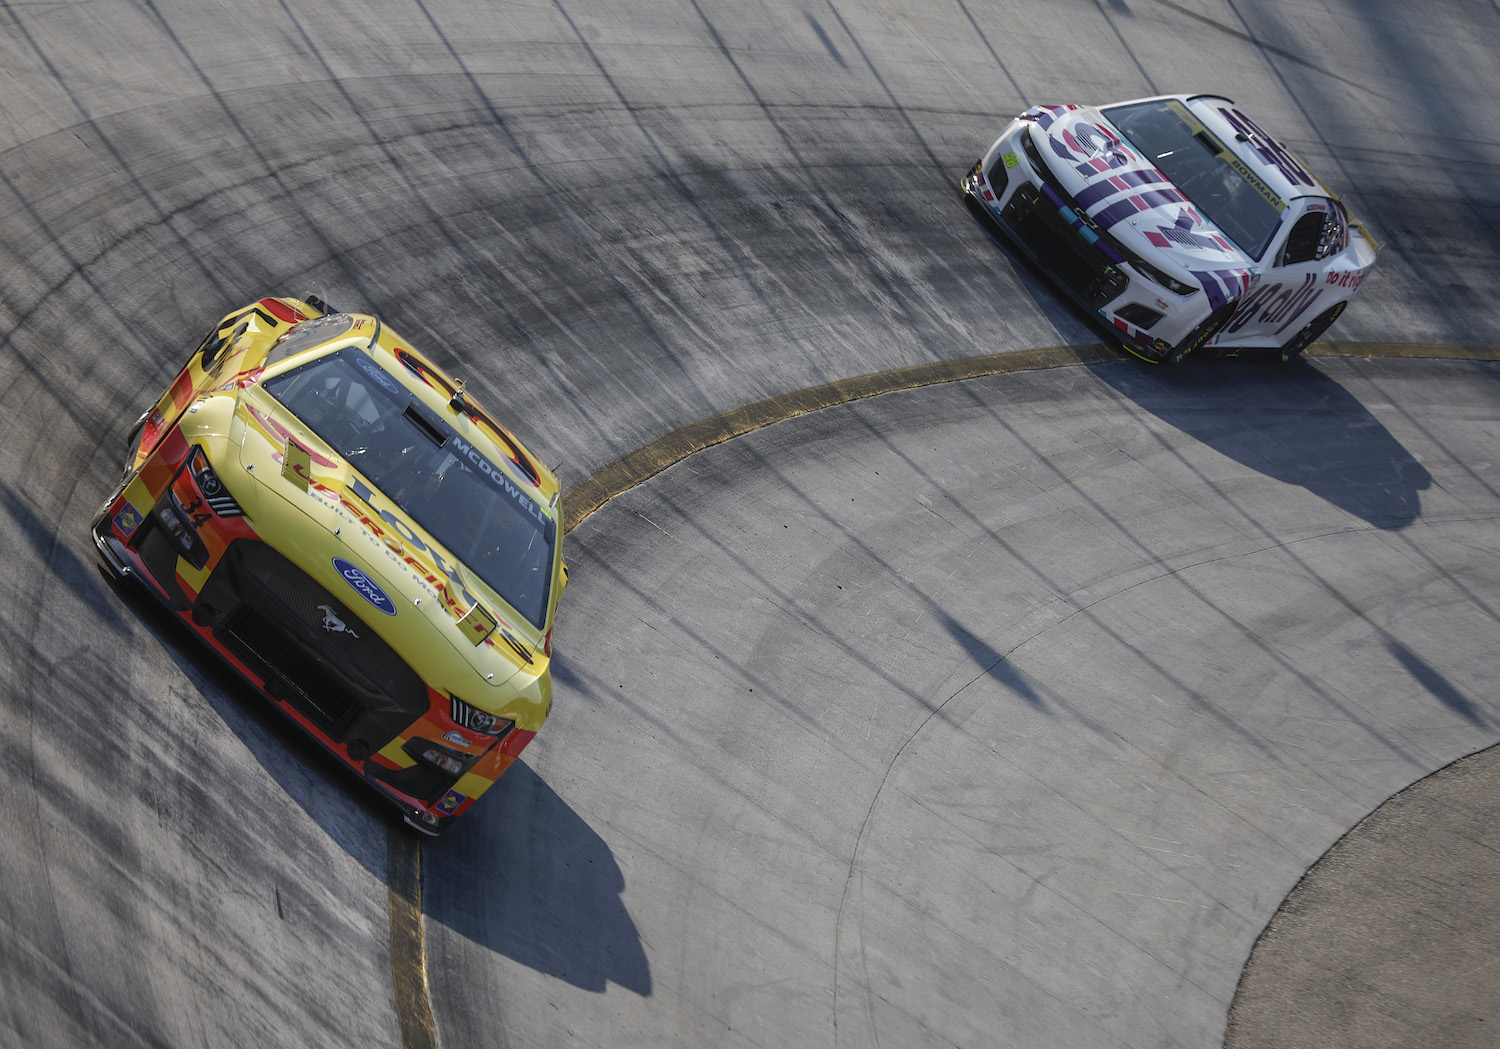 Two NASCAR Cup Cars completing practice laps at Bristol Motor Speedway before a race.